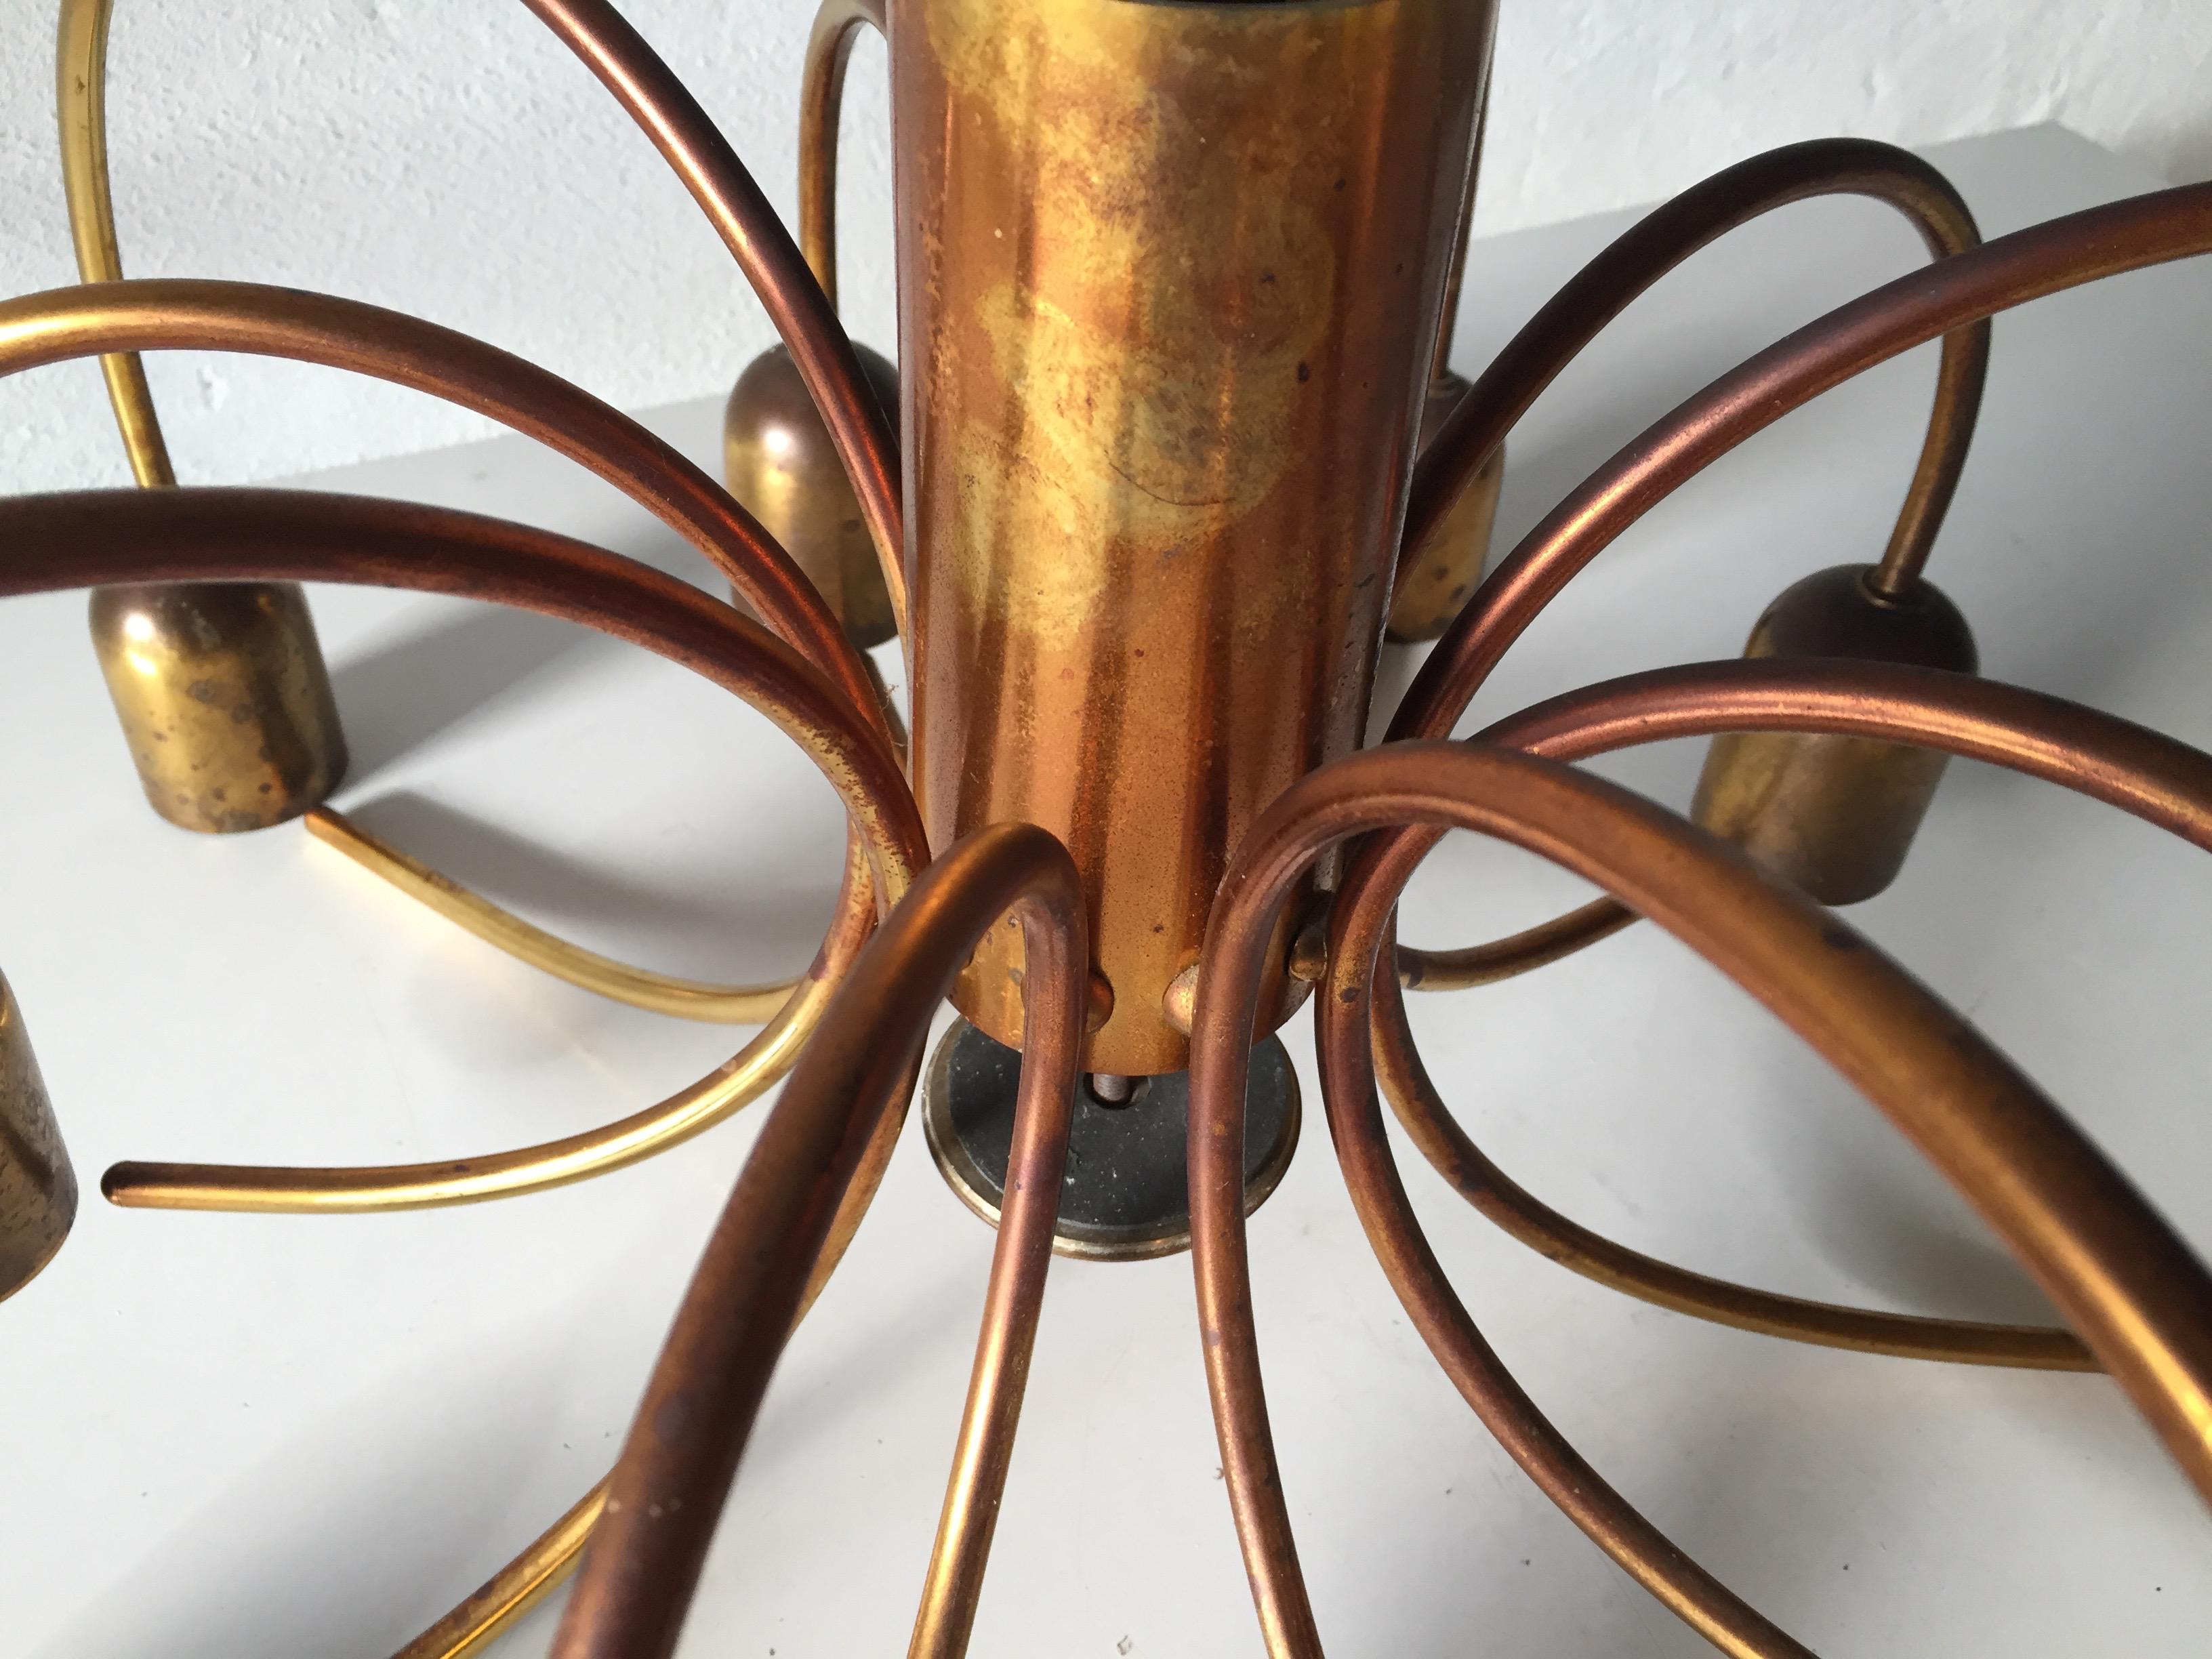 Rare 10 Arc Shaped Arms Full Brass Chandelier by Cosack Leuchten, 1970s Germany For Sale 7